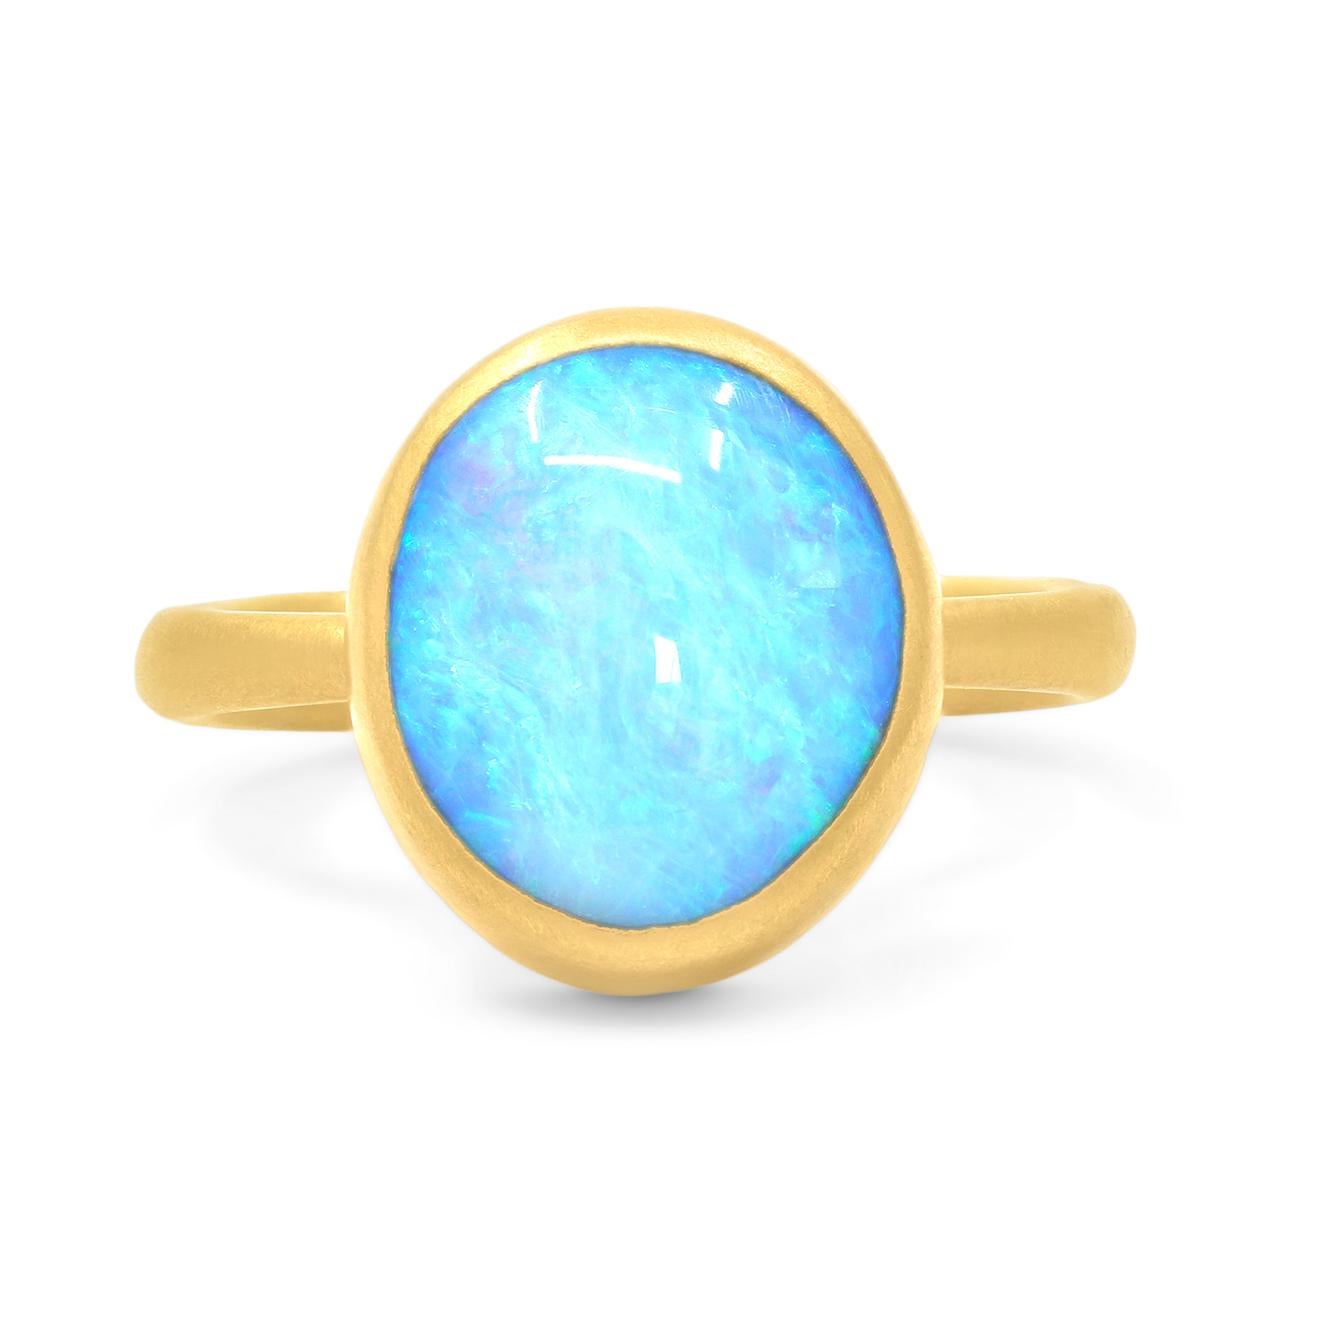 One of a Kind Ring by acclaimed jewelry maker Lola Brooks hand-fabricated in signature-finished 22k yellow gold featuring a magnificent 5.82 carat bright violet blue boulder opal cabochon with primary neon green, violet, and blue fire, bezel-set and